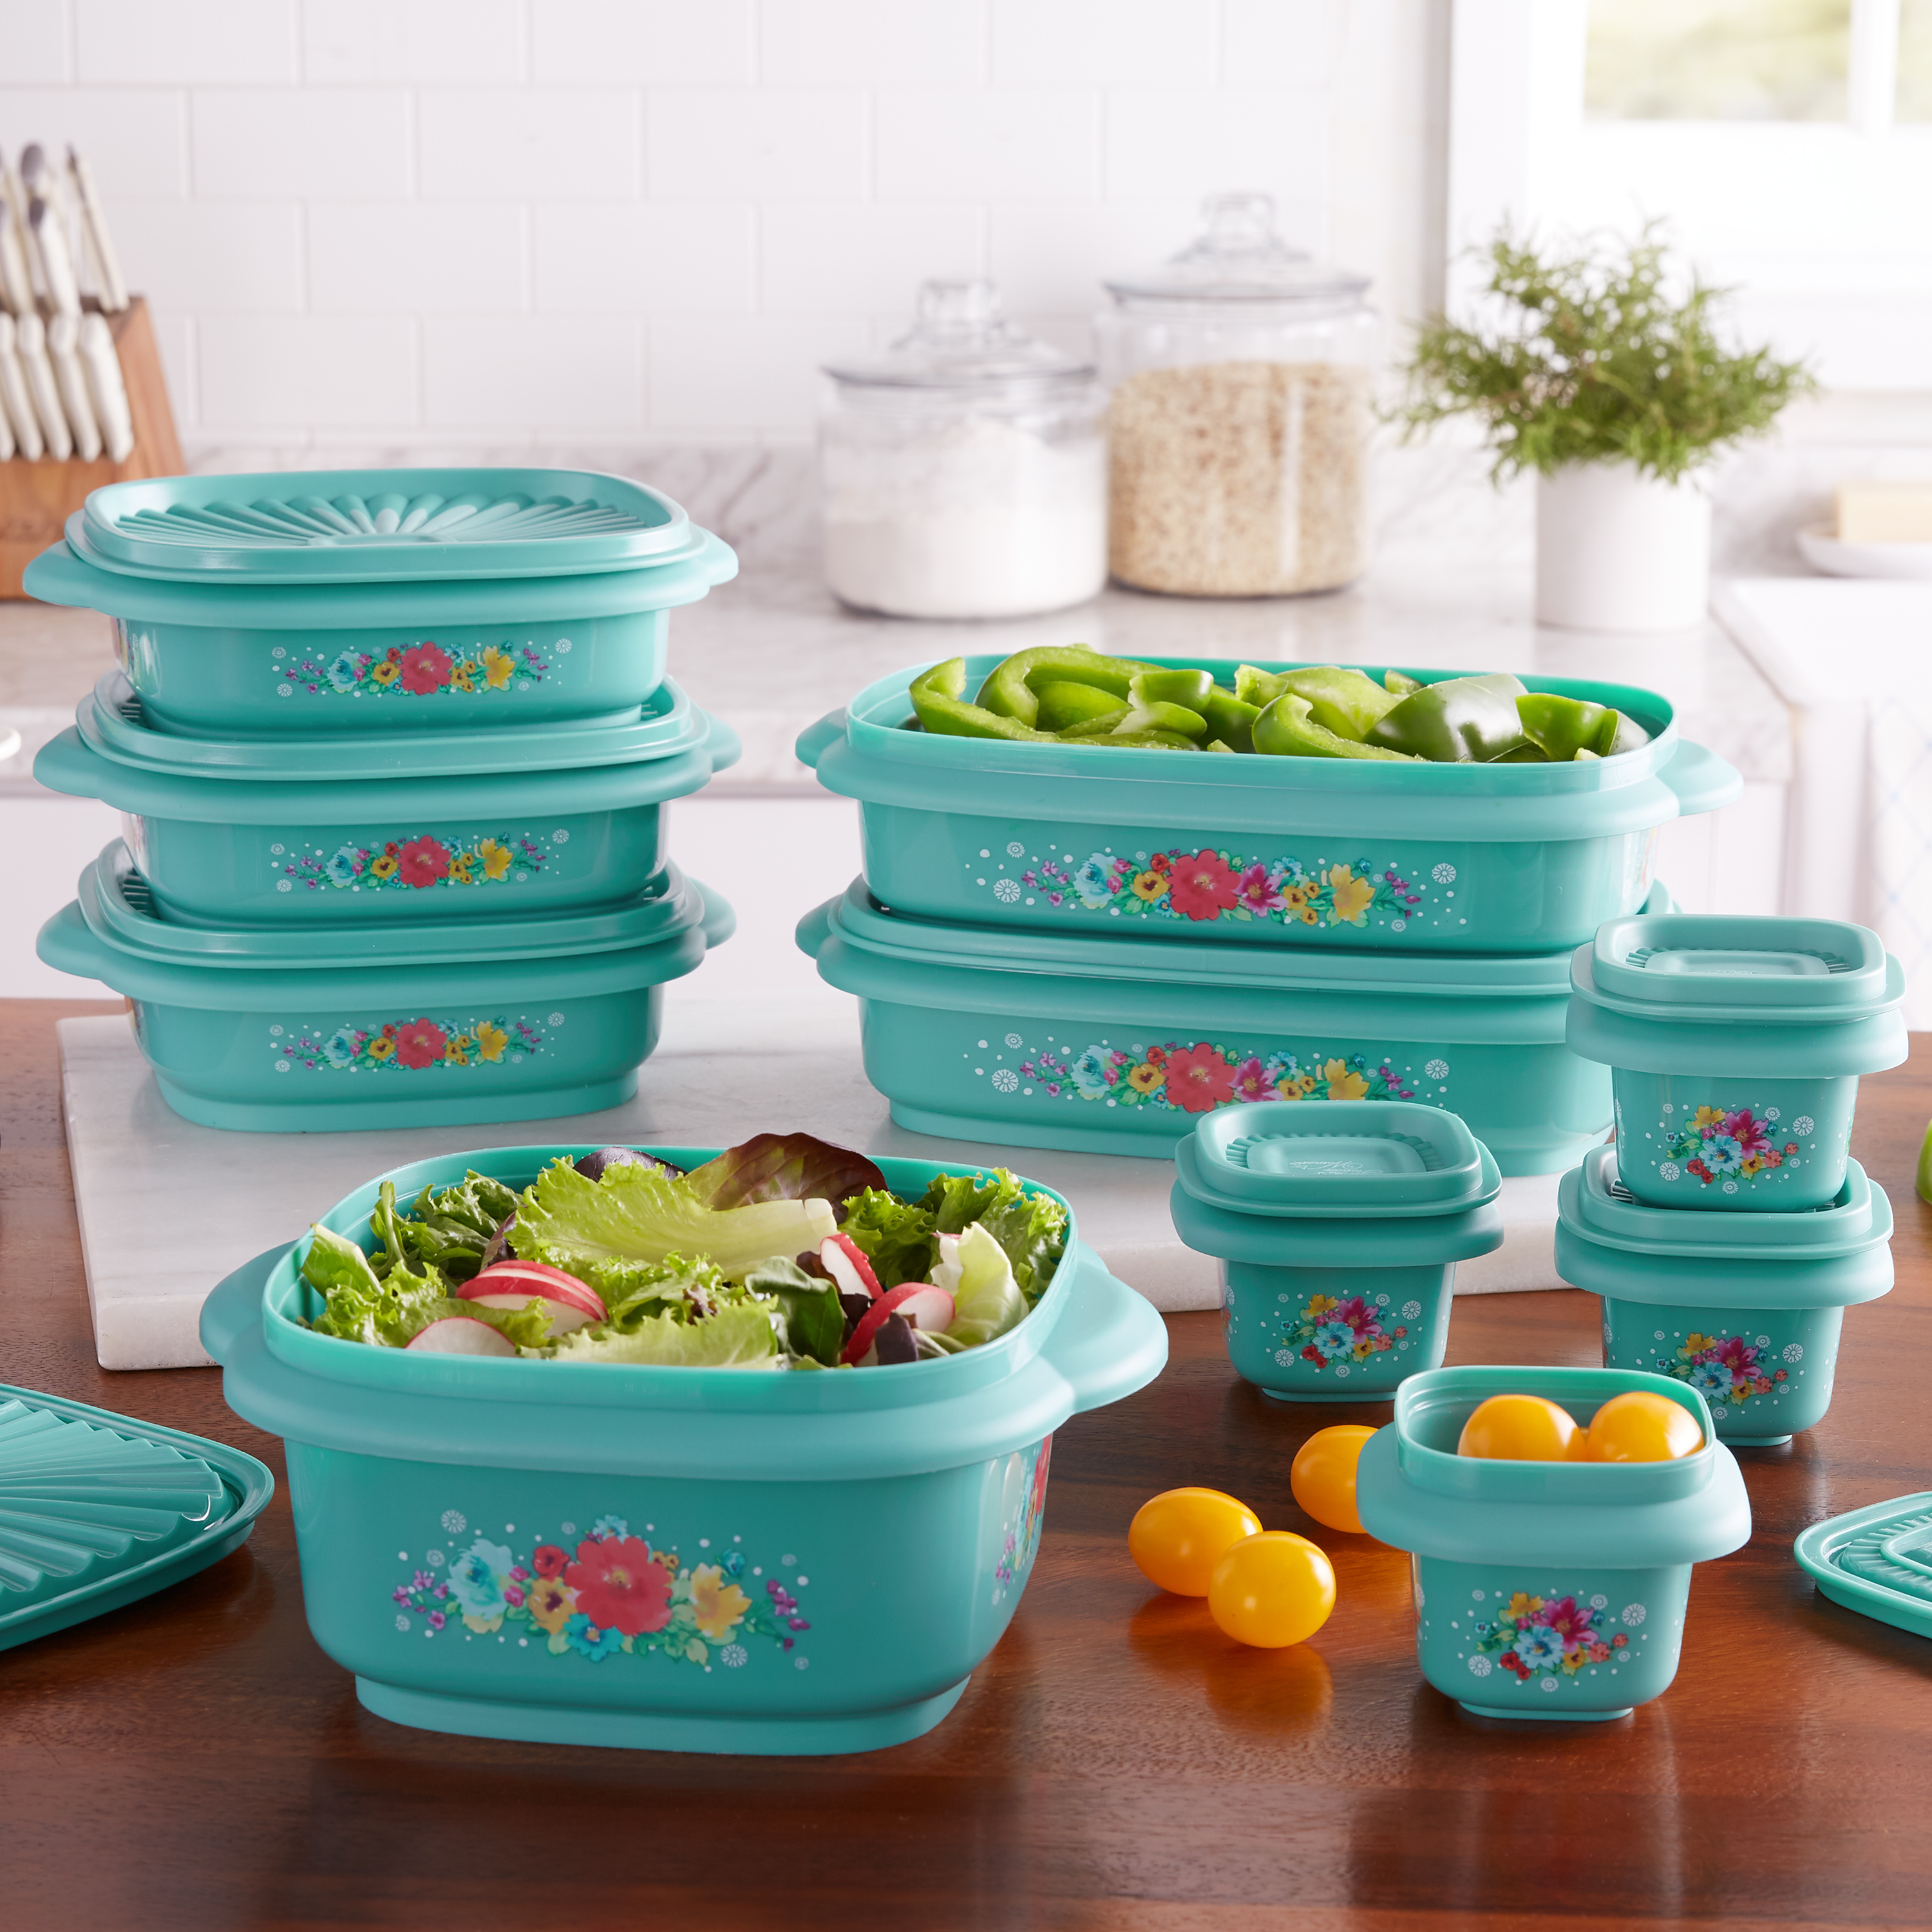 The Pioneer Woman 20 Piece Plastic Food Storage Container Variety Set, Breezy Blossom - image 2 of 5